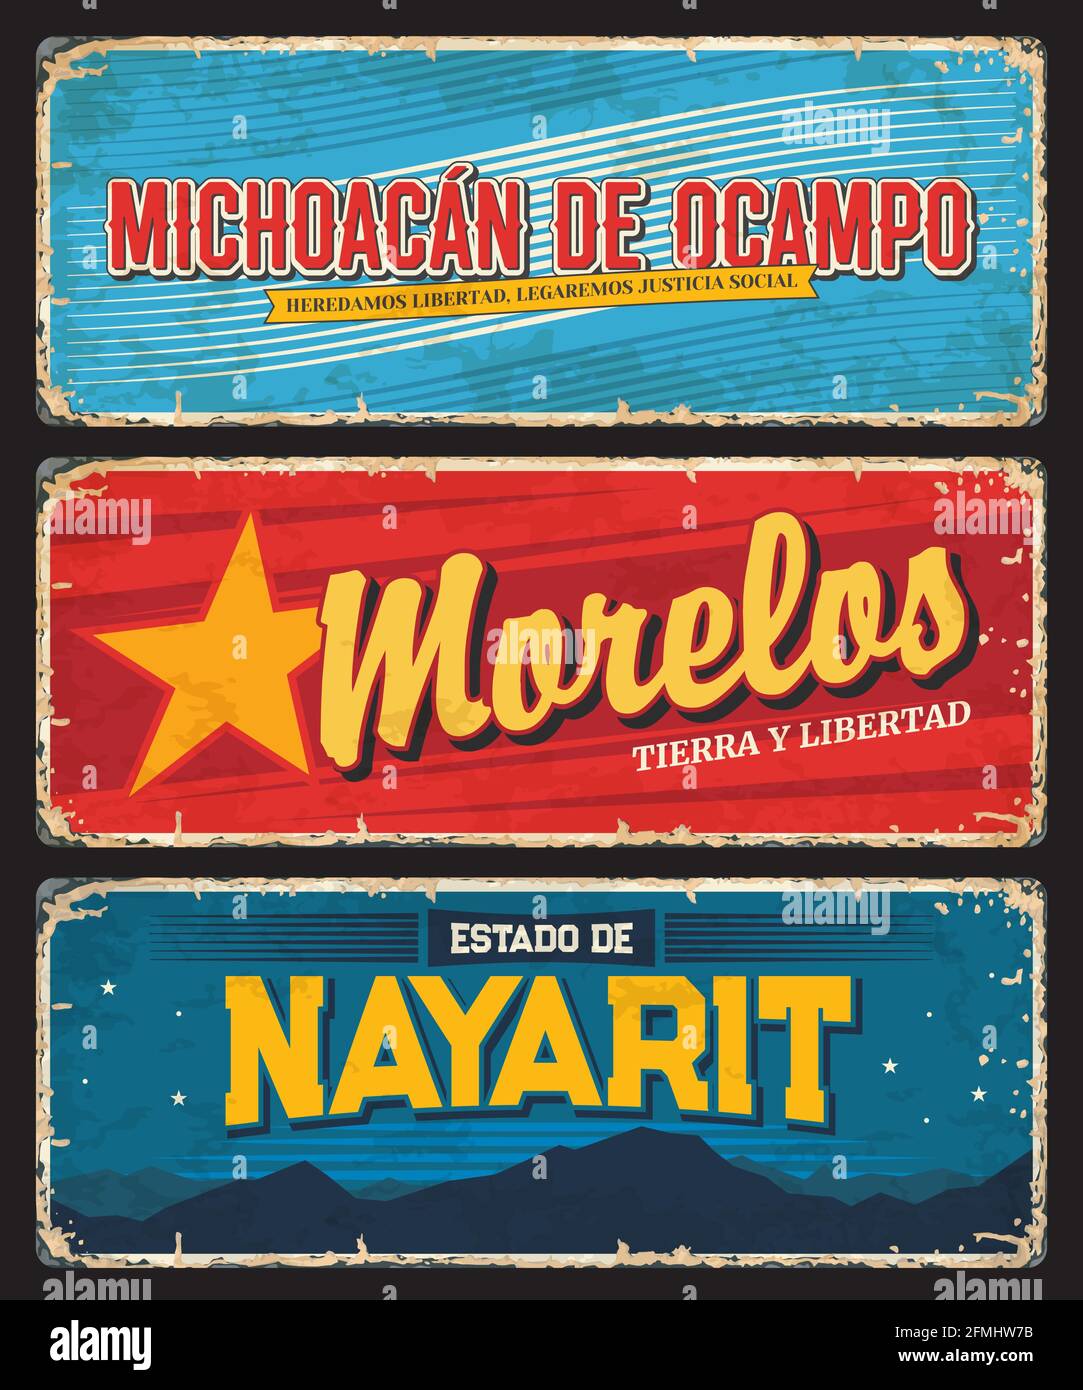 Michoacan de Ocampo, Morelos and Nayarit Mexico states tin signs. Mexico regions vector metal plates vintage typography and shabby sides. North Americ Stock Vector